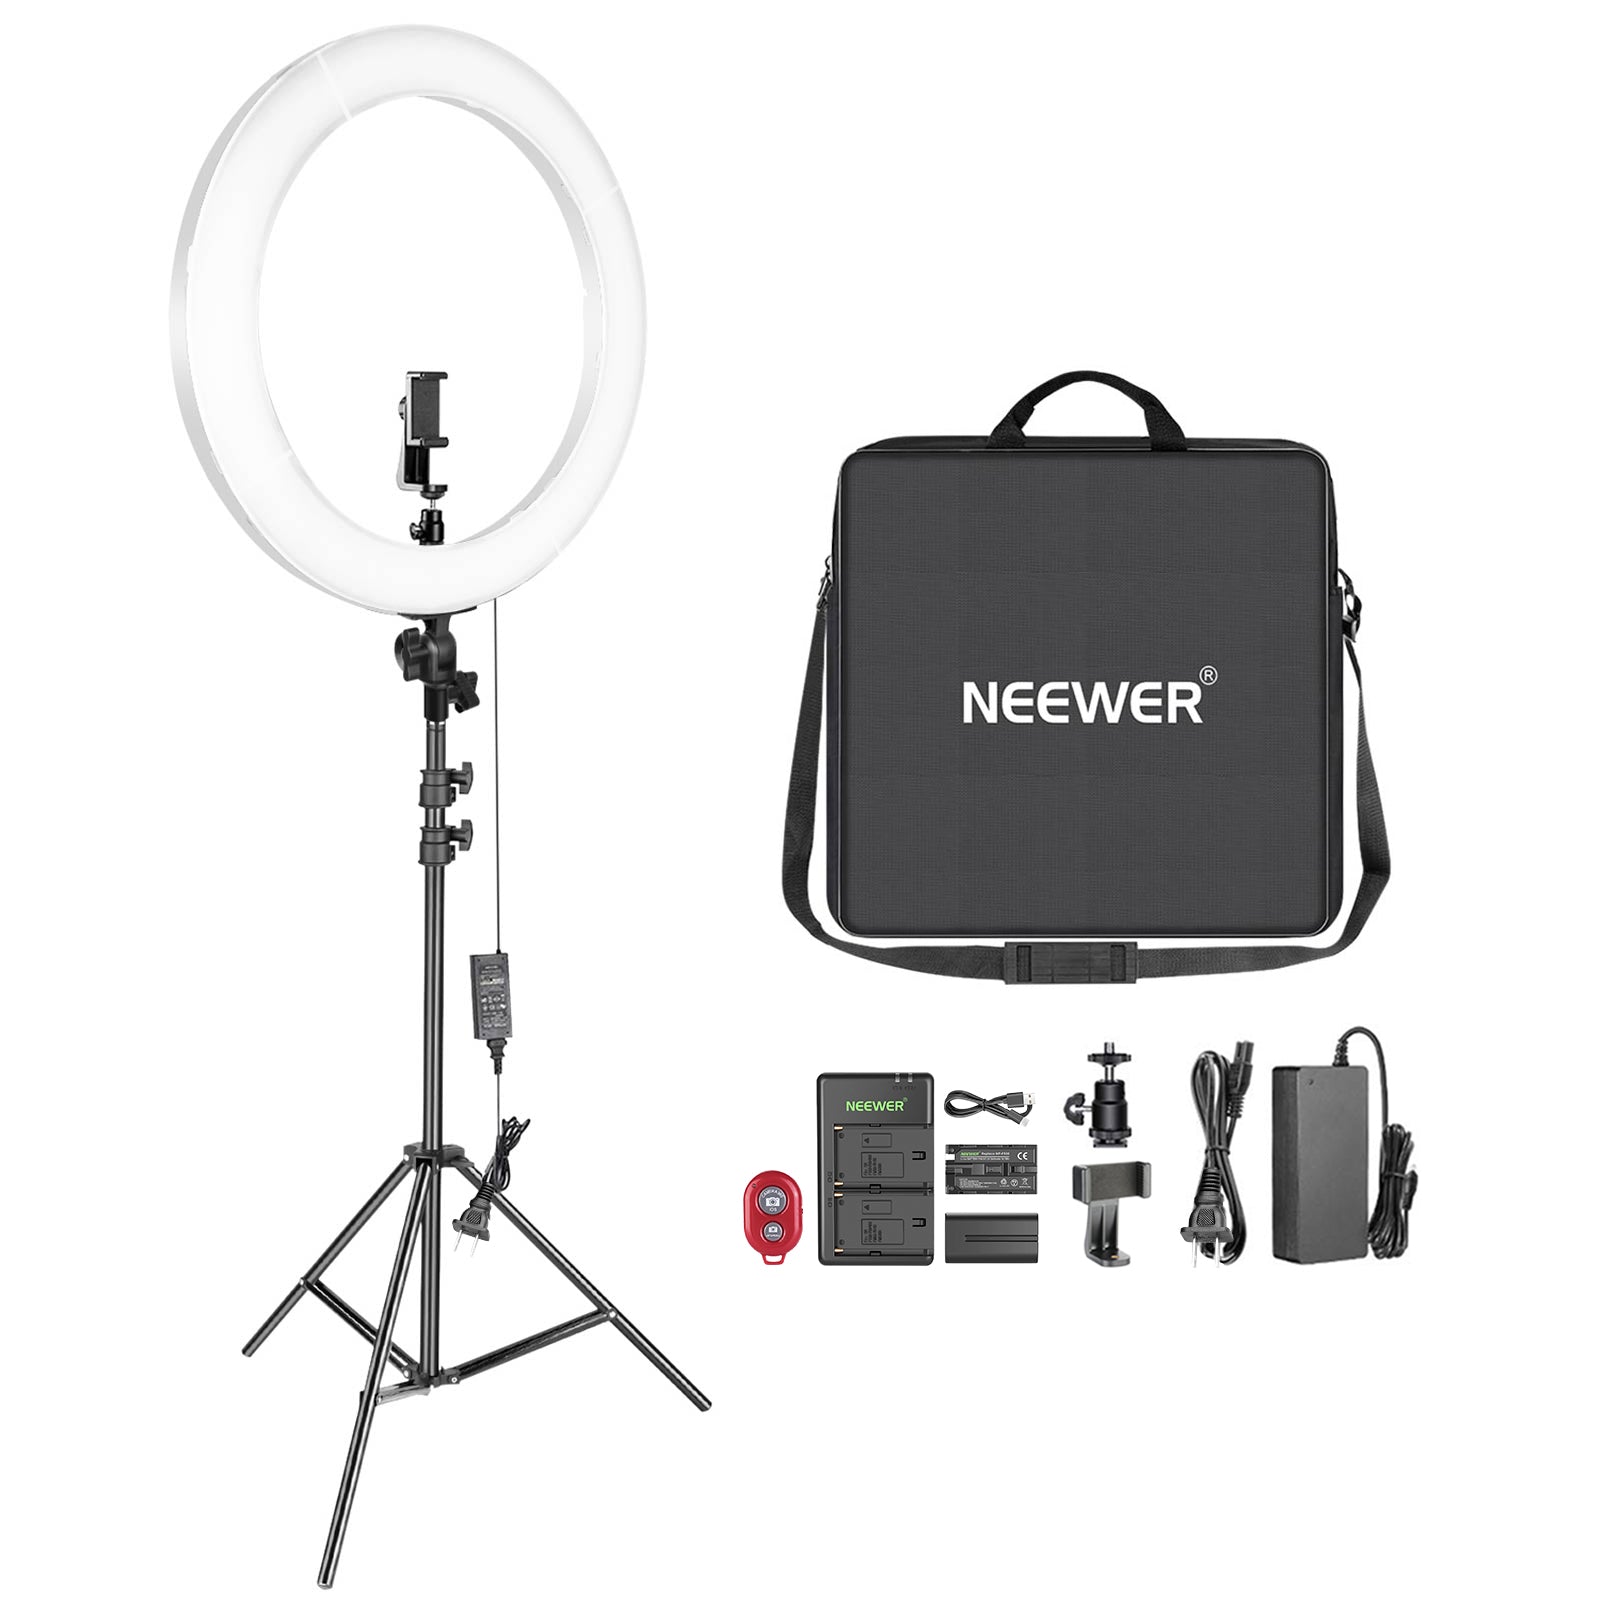 NEEWER 20 CRI 97+ Big Dimmable Bi-color Outdoor Photography Ring